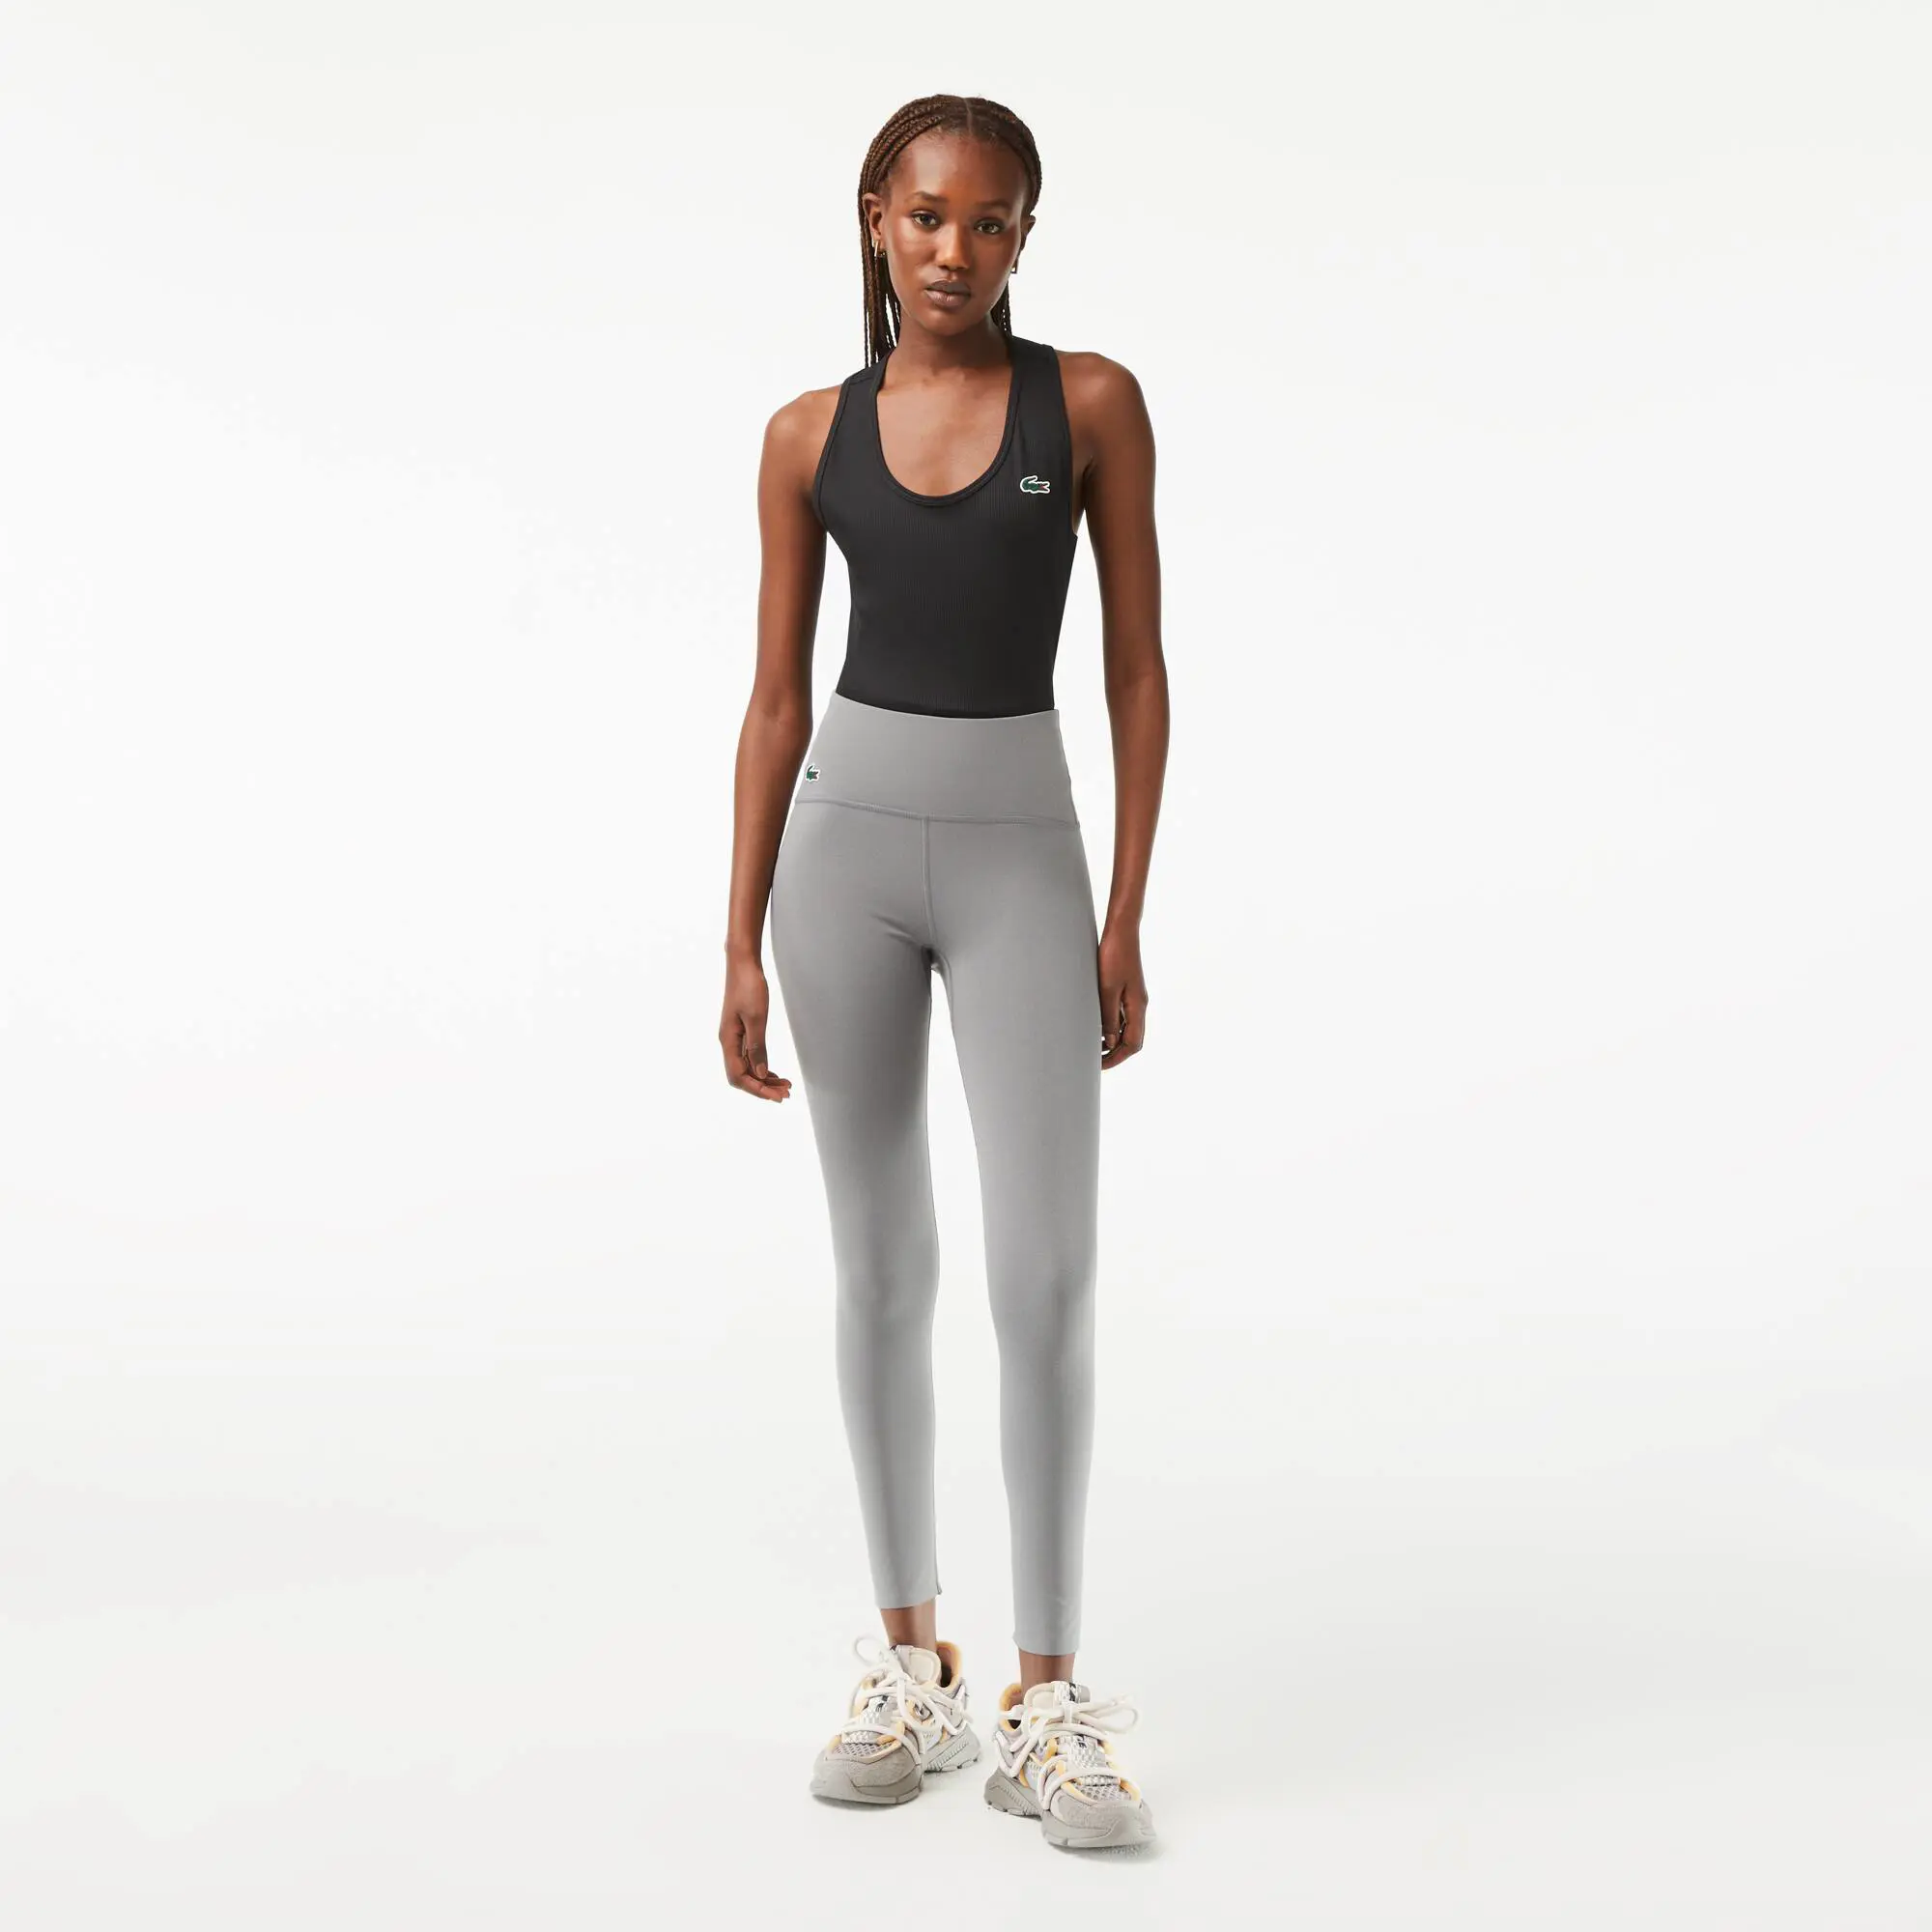 Lacoste Women’s Lacoste Sport Recycled Polyester Sculpting Leggings. 1